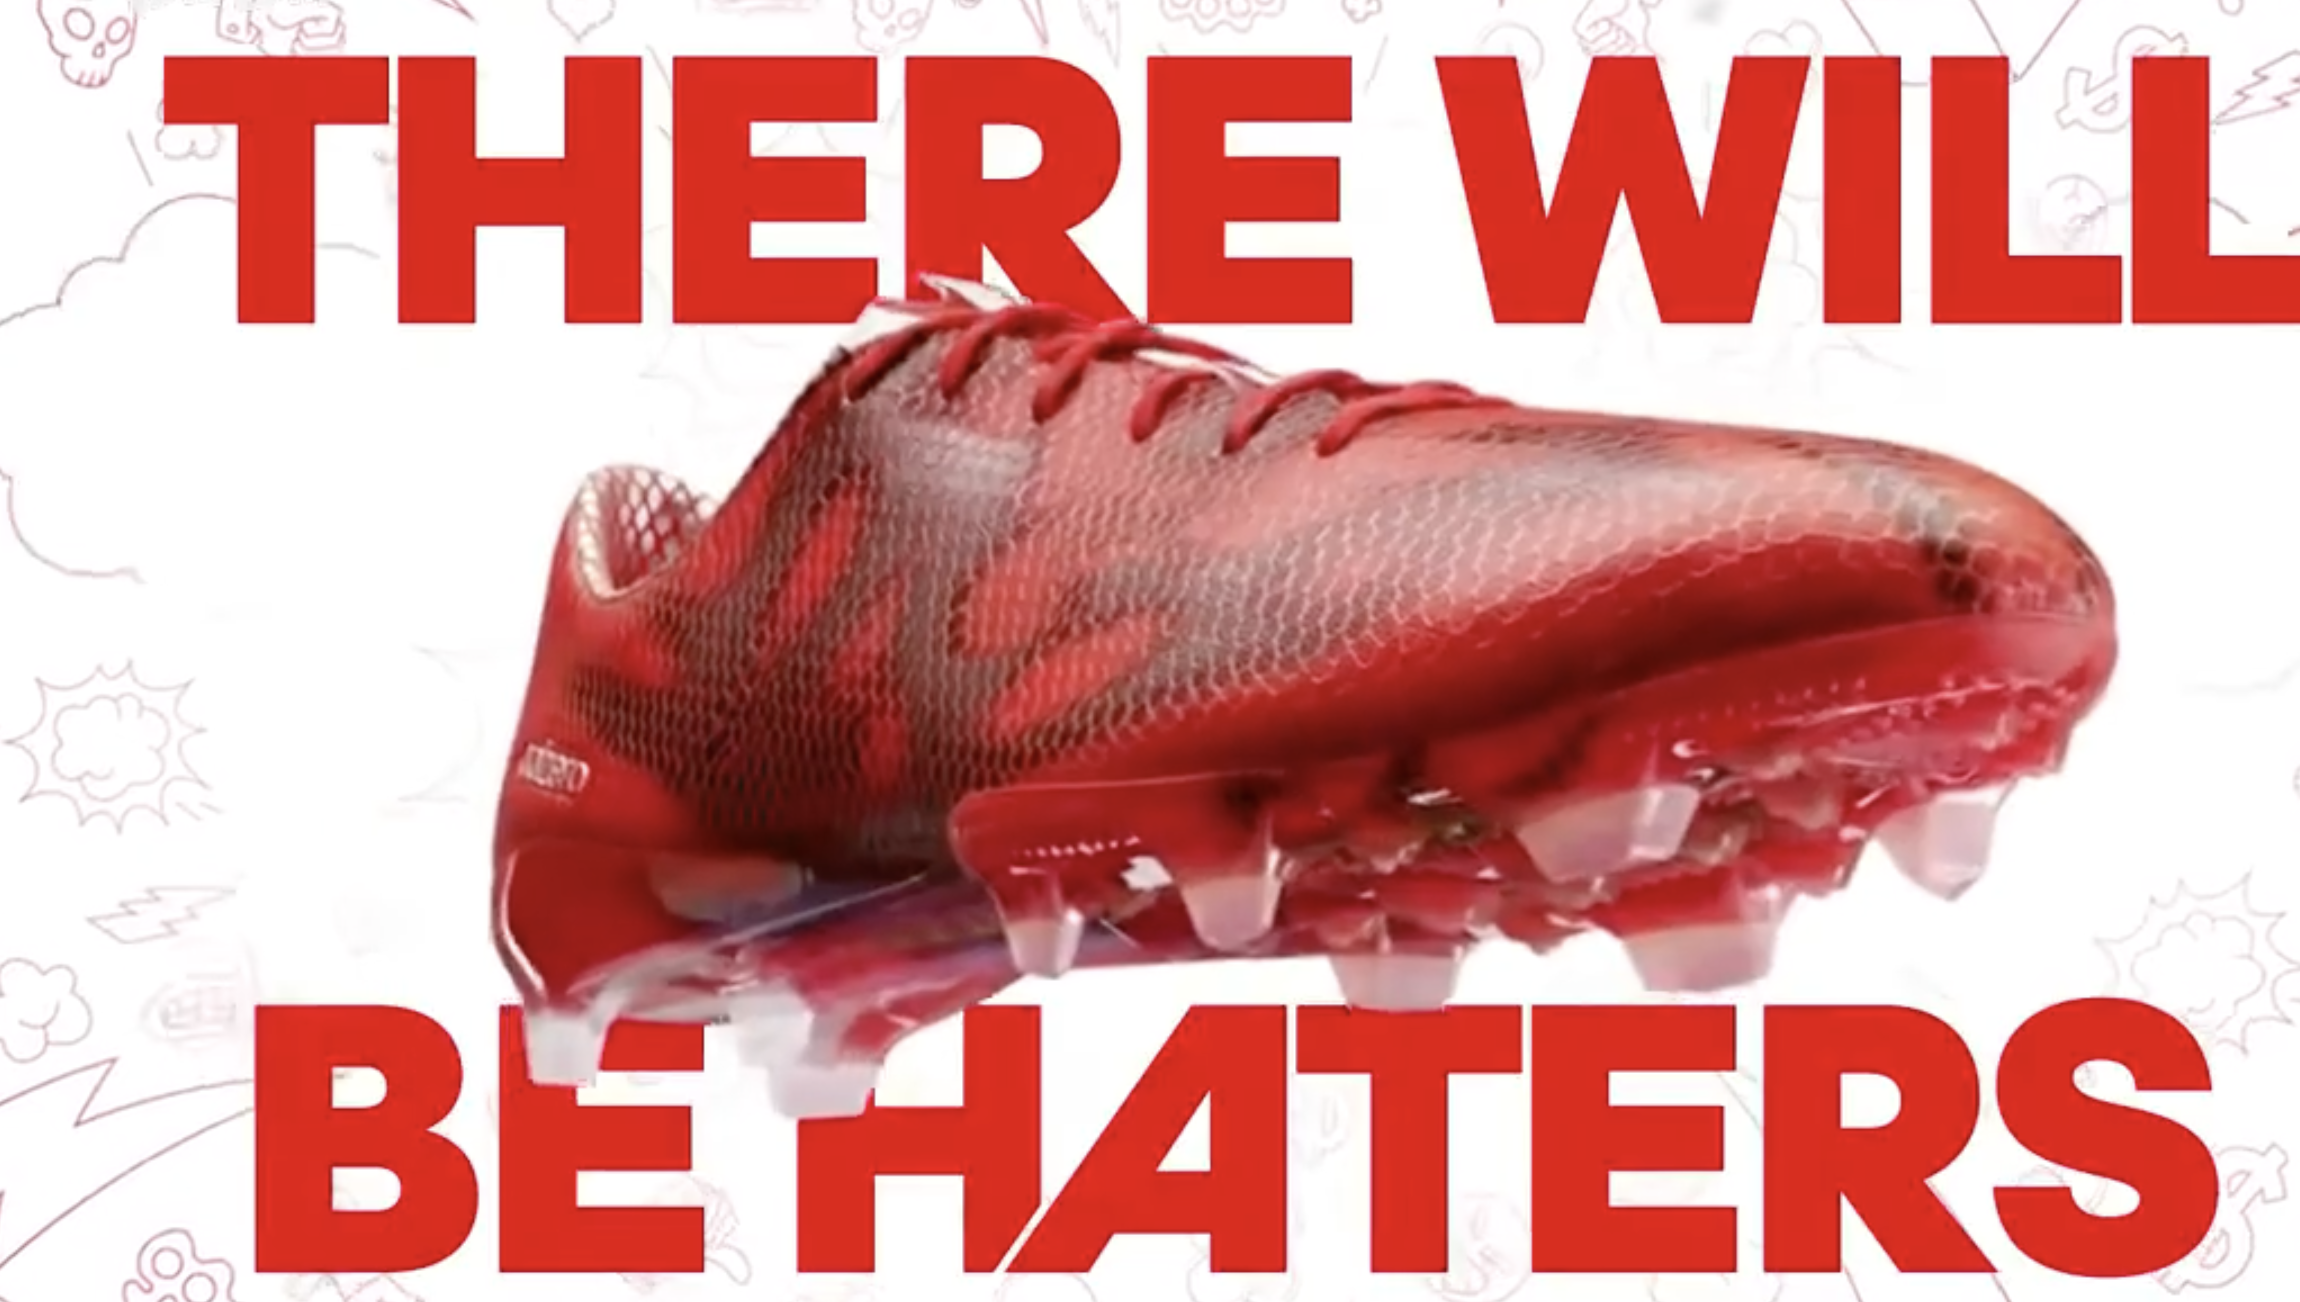 Adidas：There will be haters